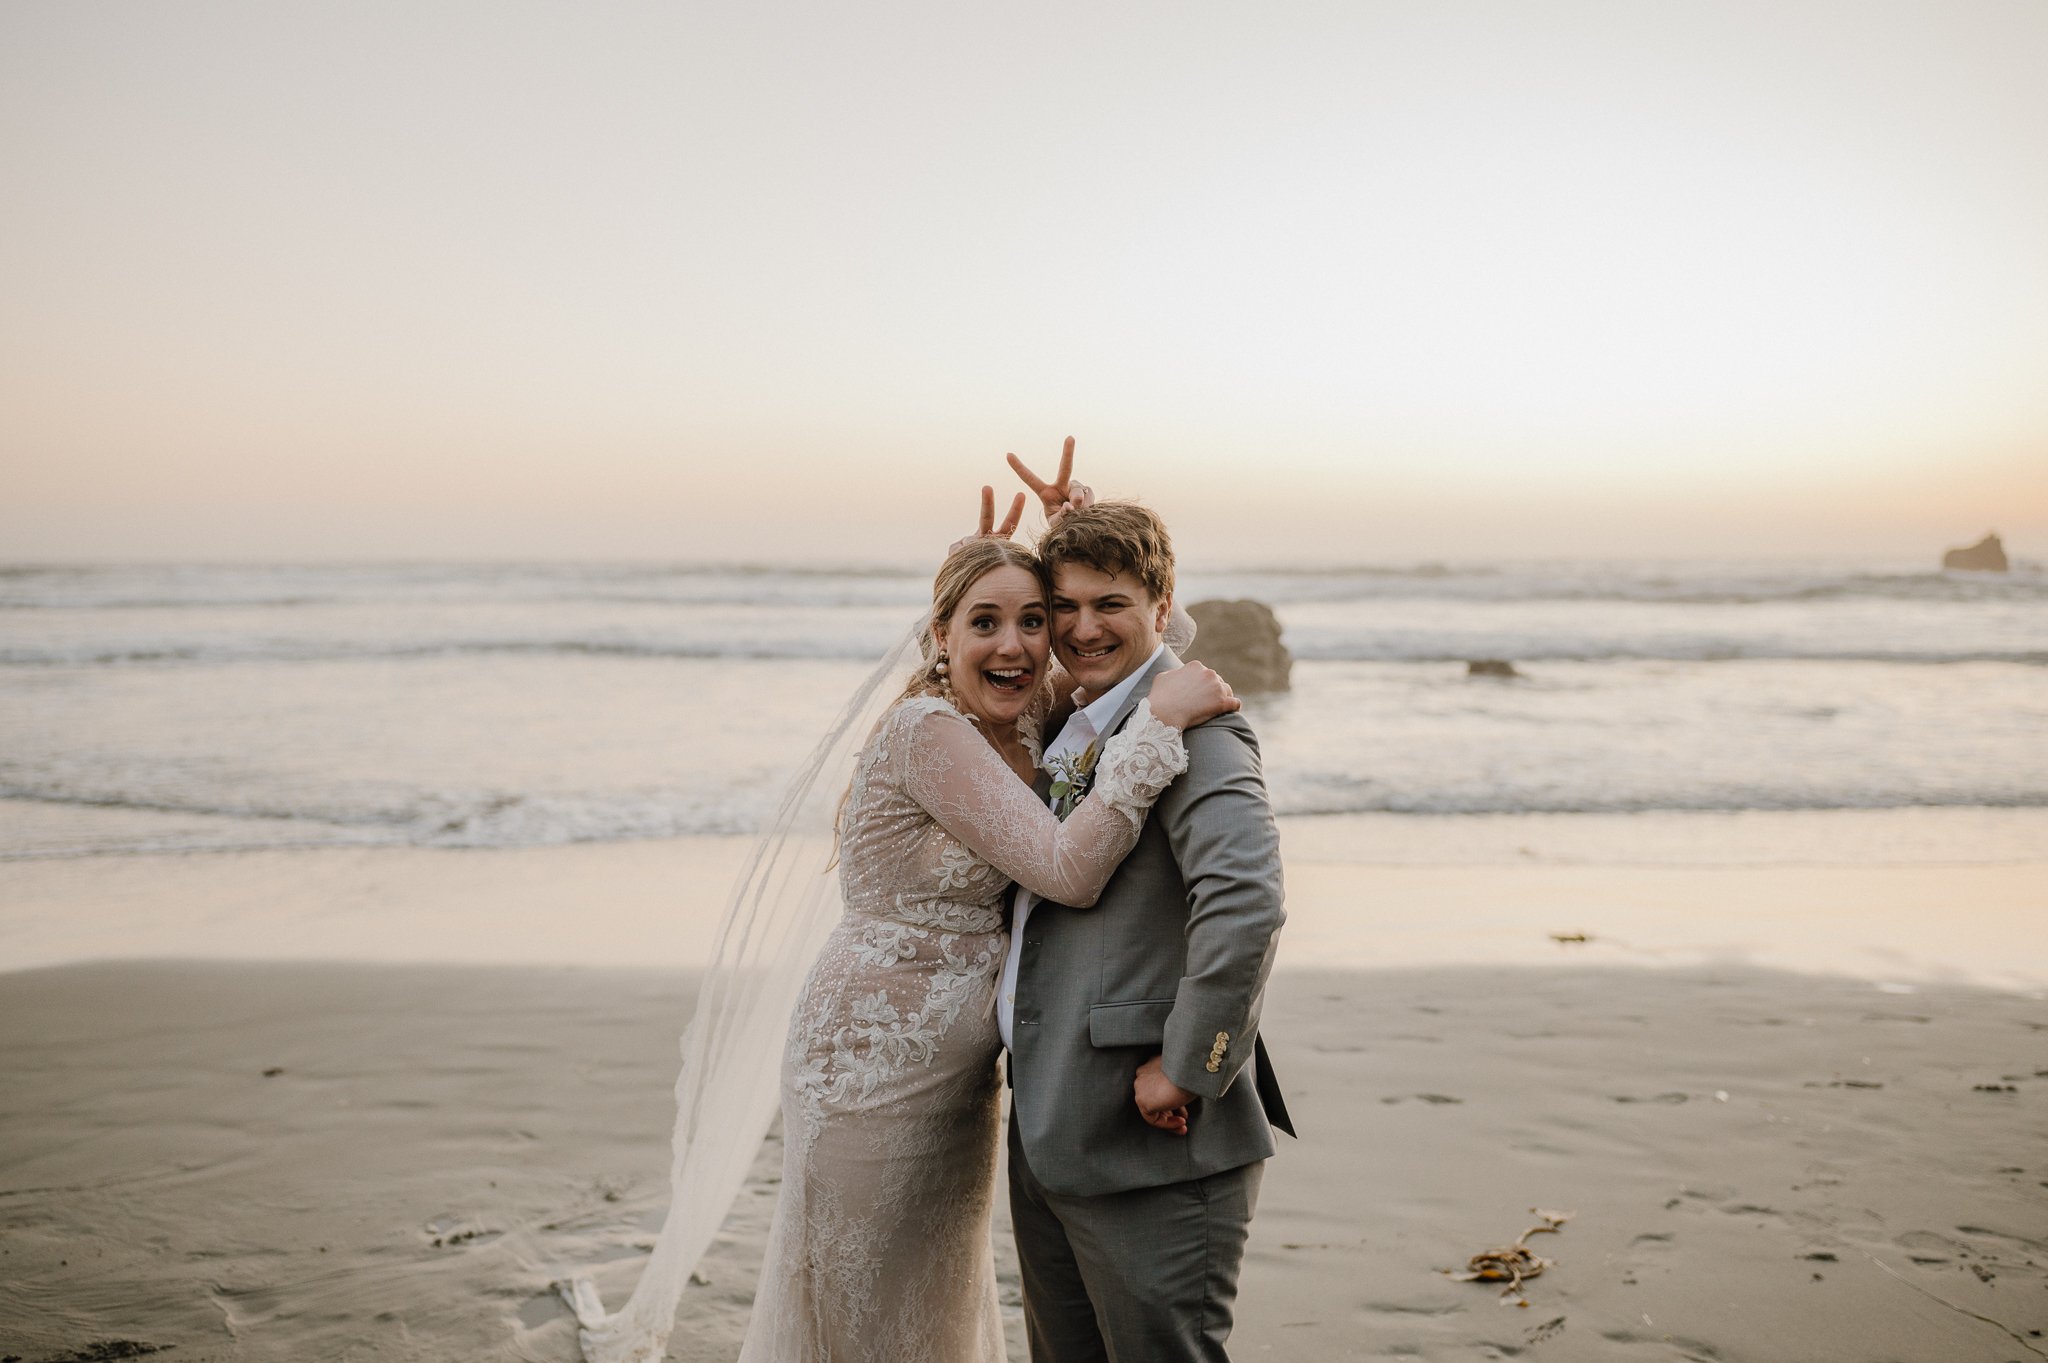 bride and groom on beach making funny faces making bunny ears behind each others heads